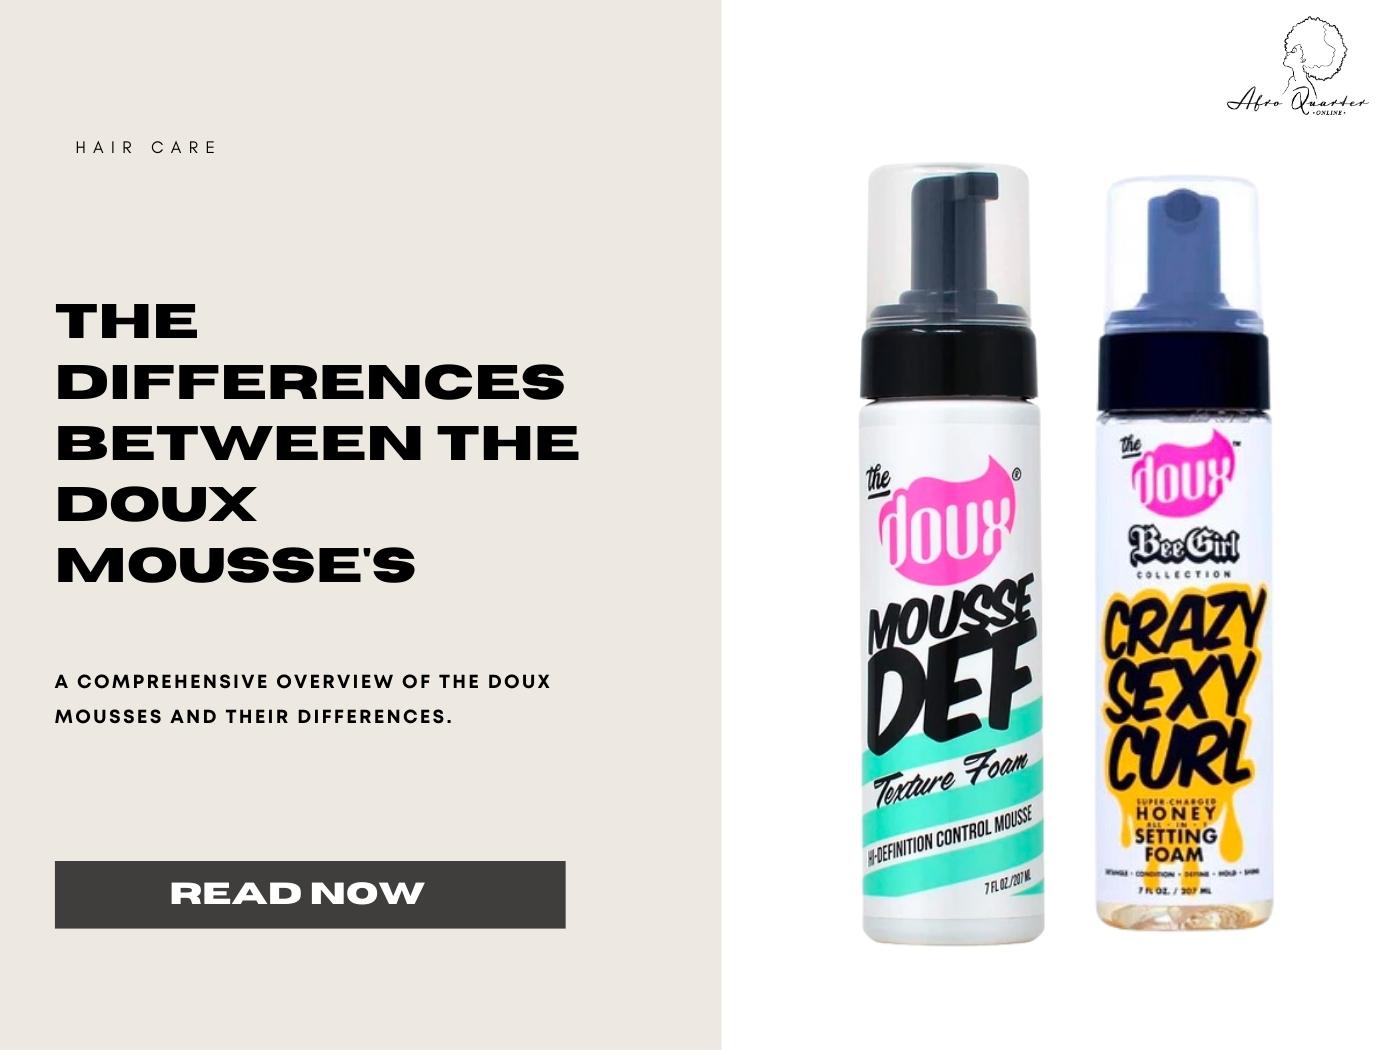 The Difference Between The Doux Def Mousse Texture Foam To The Doux Crazy Honey Setting Foam Curl Mousse- AQ Online